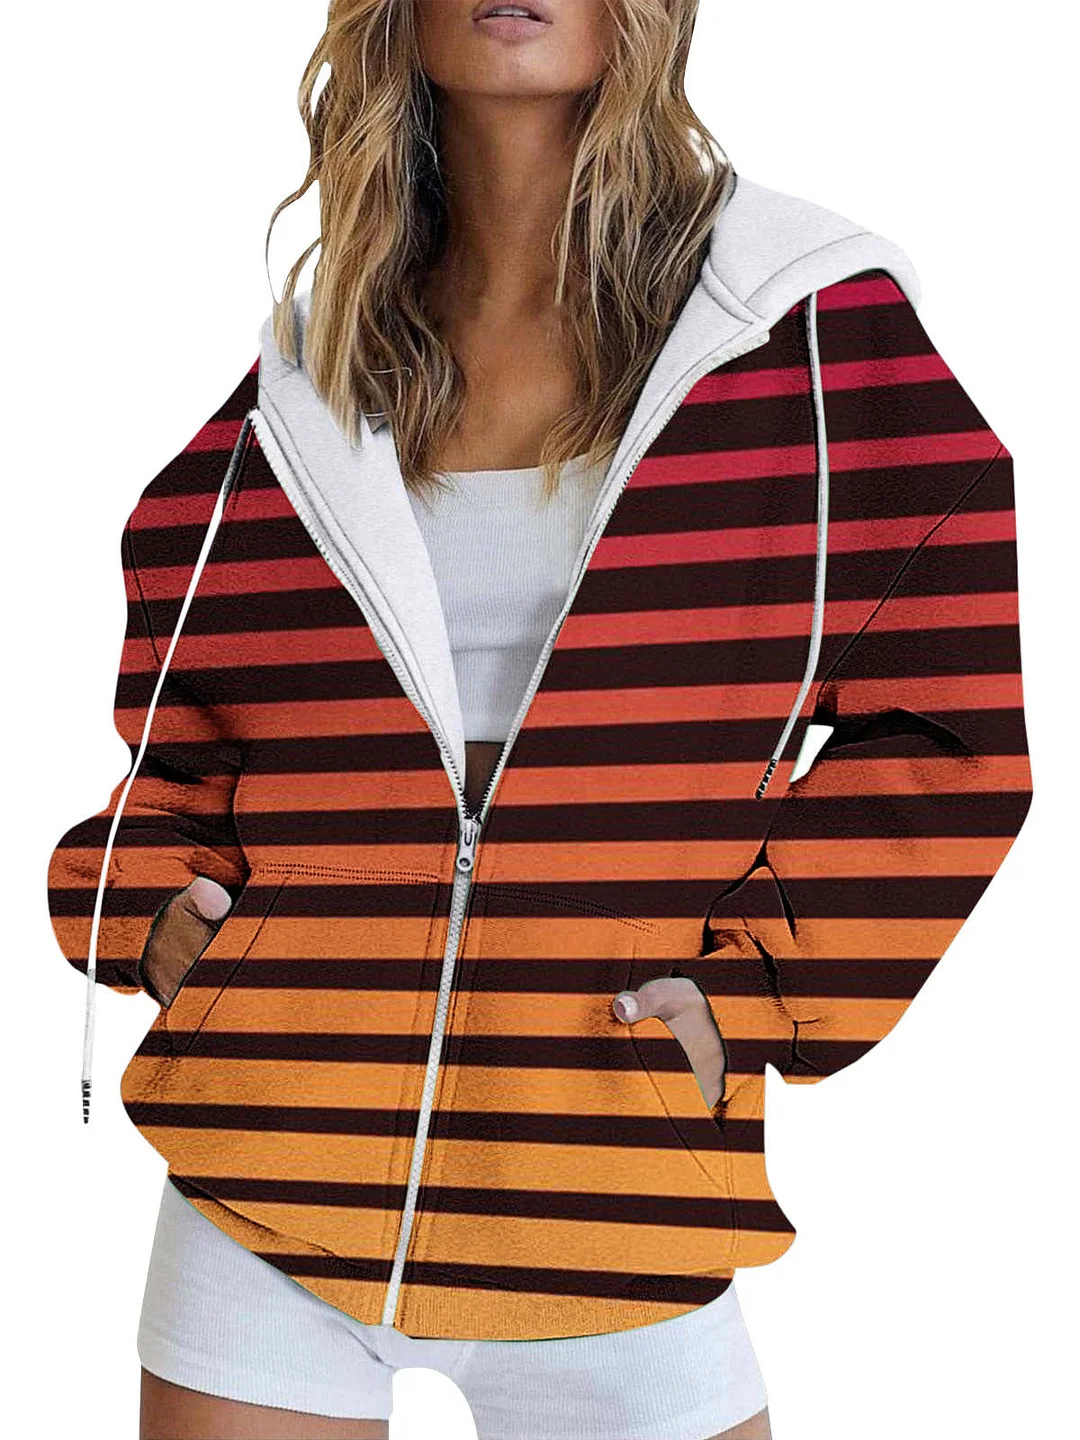 Women plus size clothing Women's Gradient Stitching Graphic Solid Color V-neck Long Sleeve Long Cardigan Sweater Coat-Nordswear